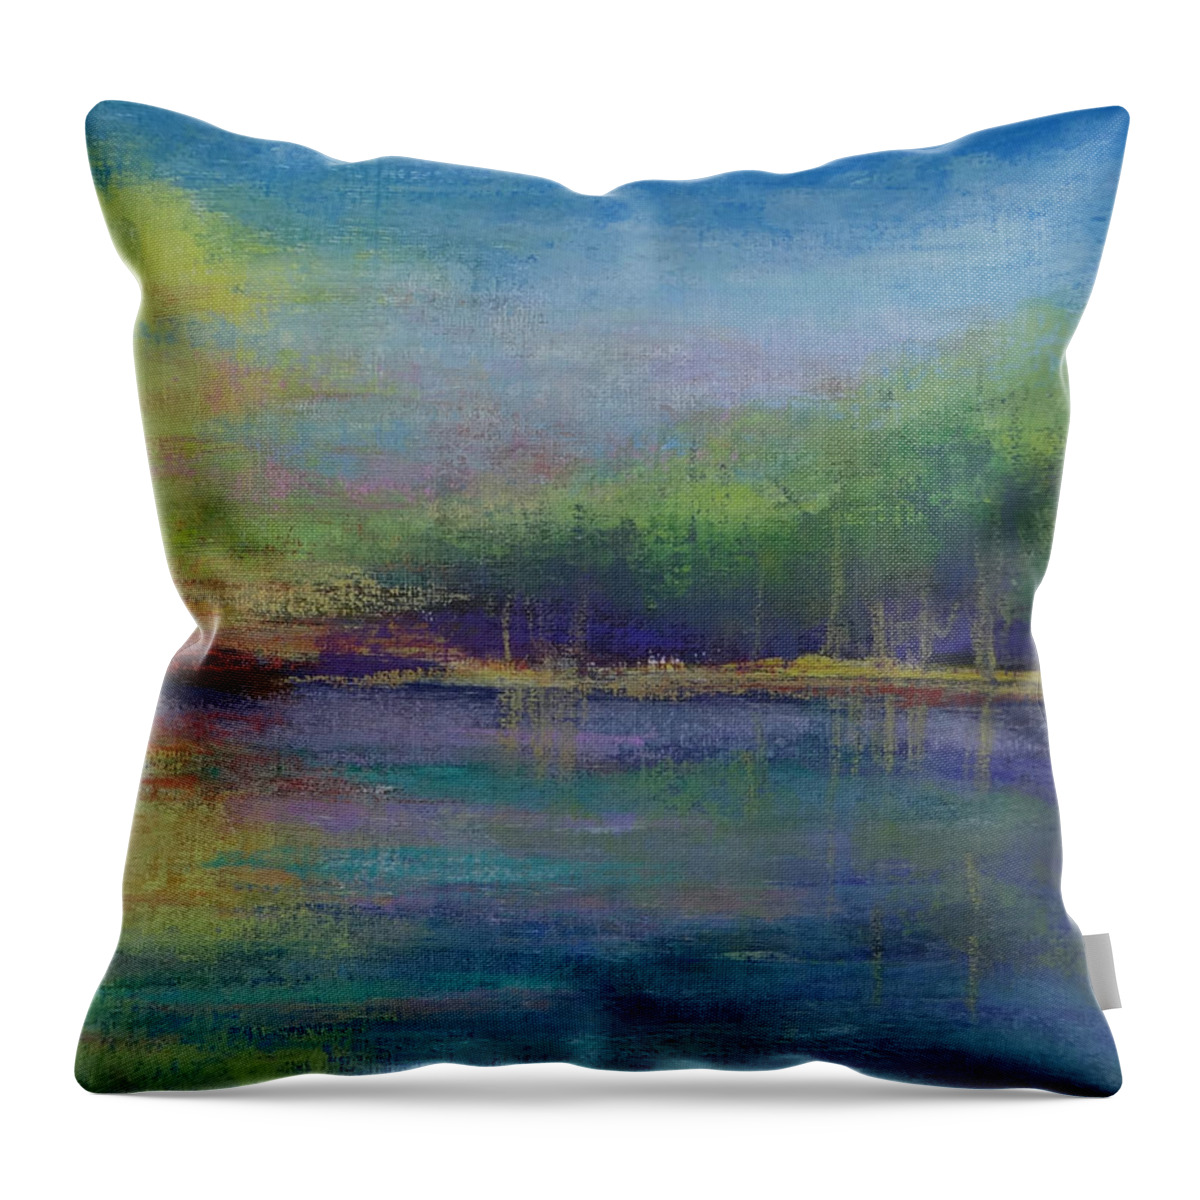 Mixed Media Throw Pillow featuring the painting Lake at Sundown by Carol Berning